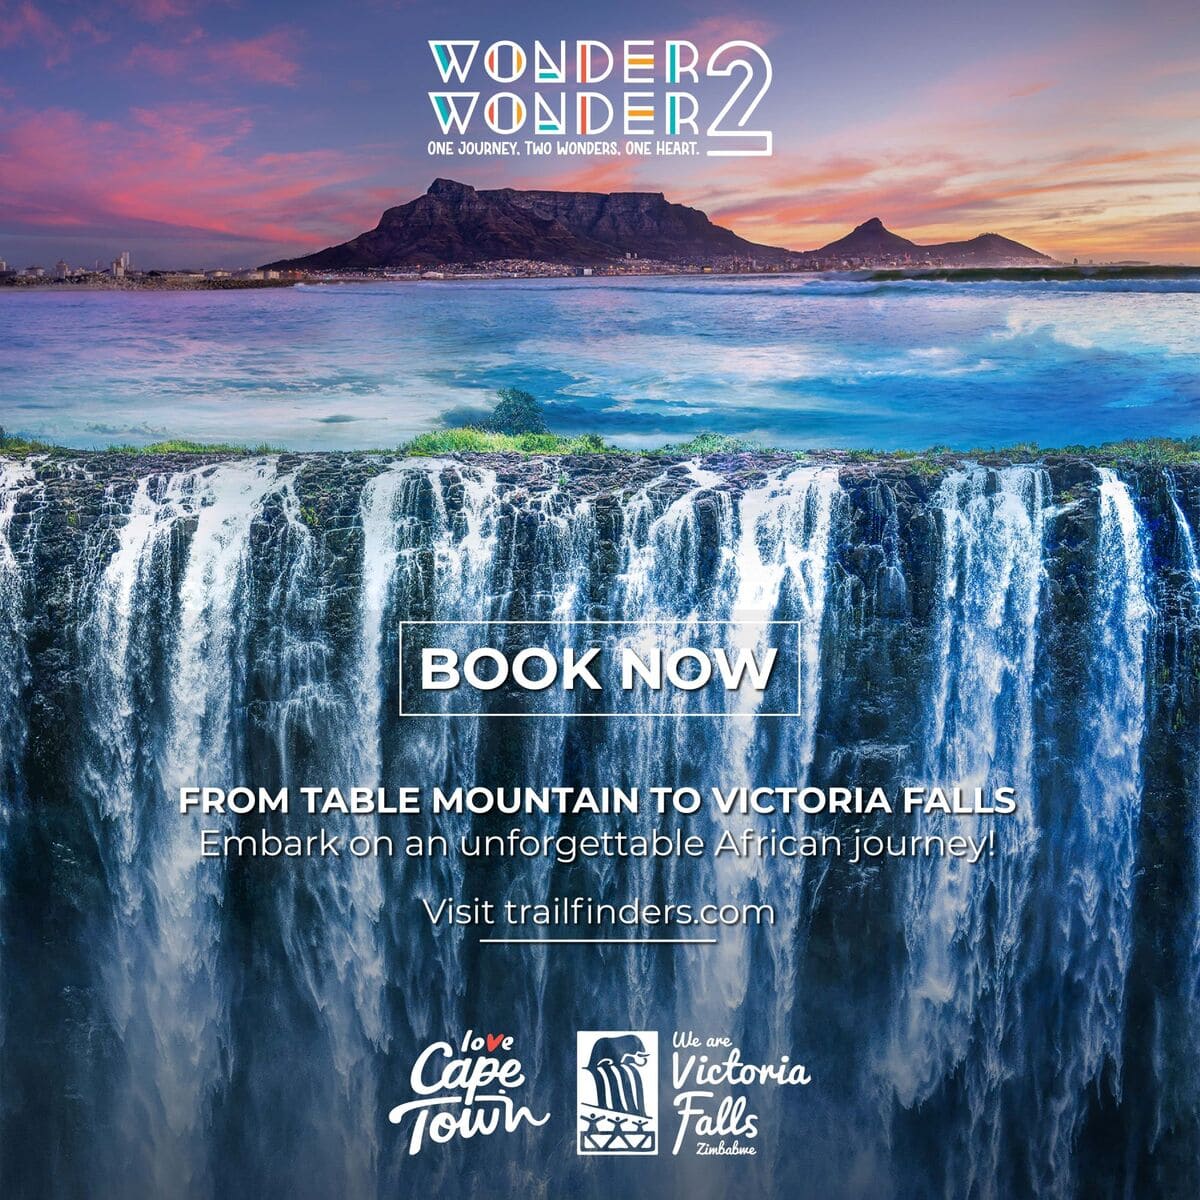 Wonder2Wonder: A New Campaign to Promote Victoria Falls and Cape Town